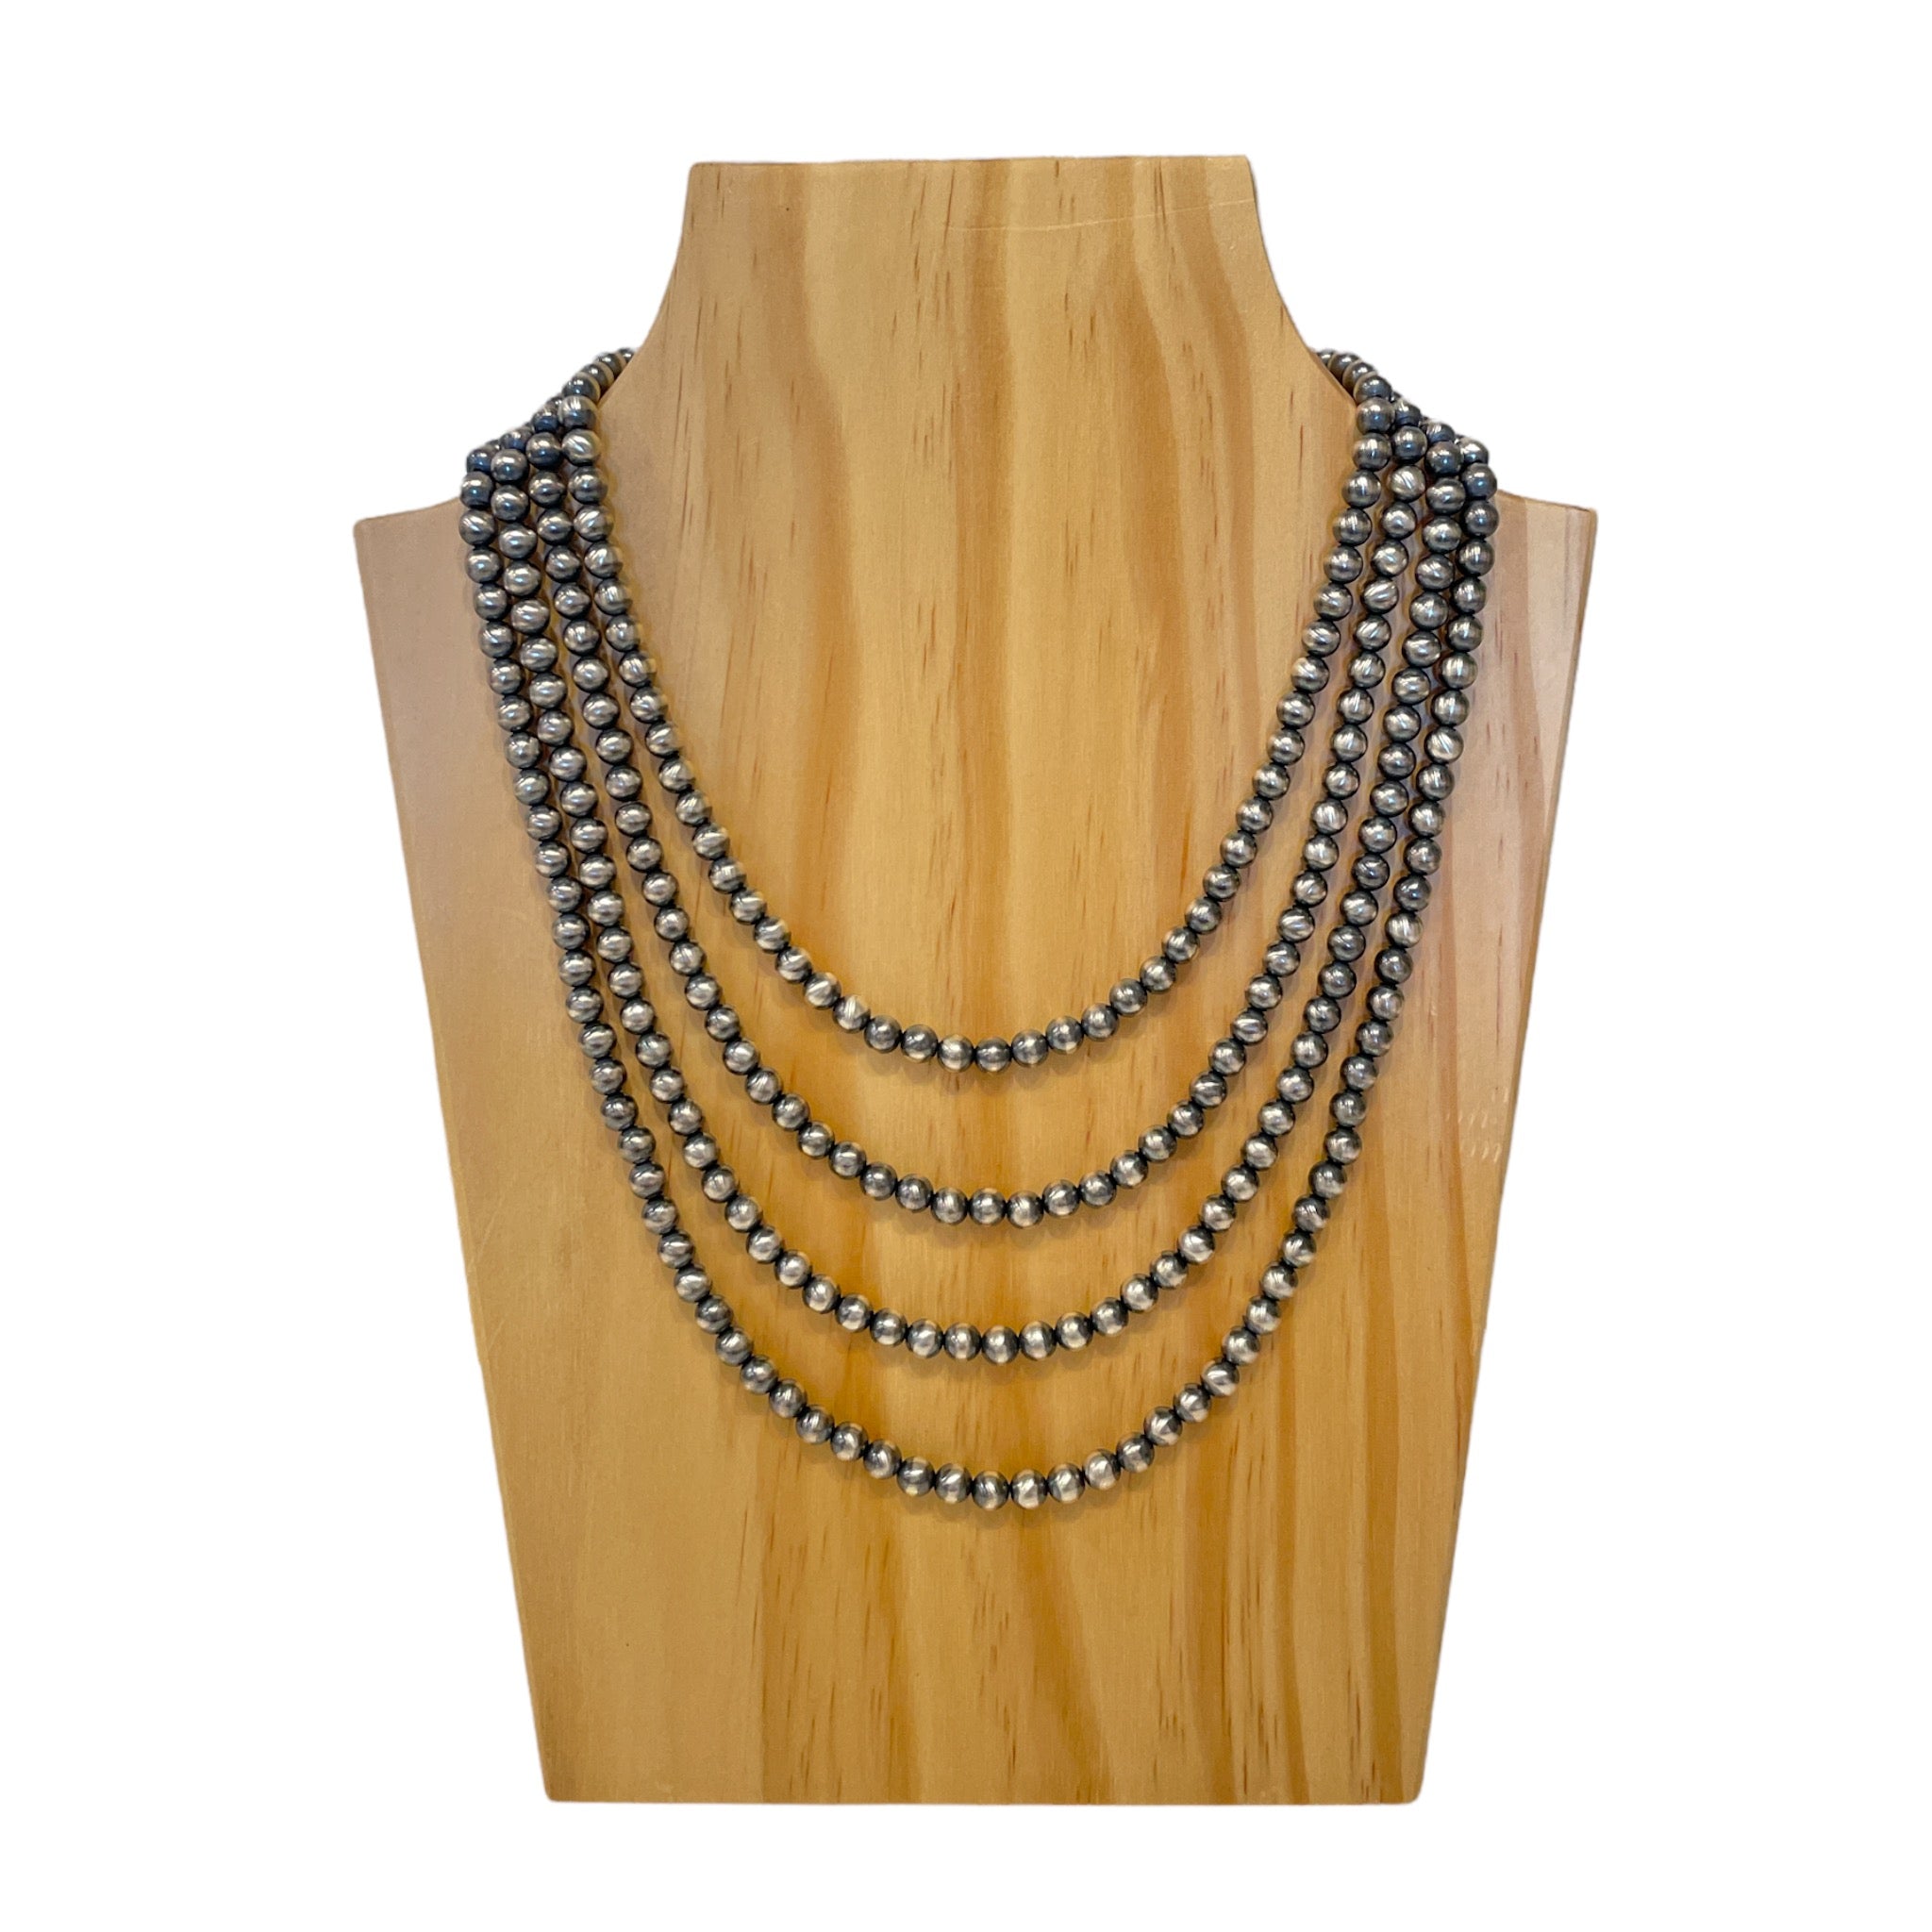 Round Oxidized Navajo Pearls Necklace 6mm - 18